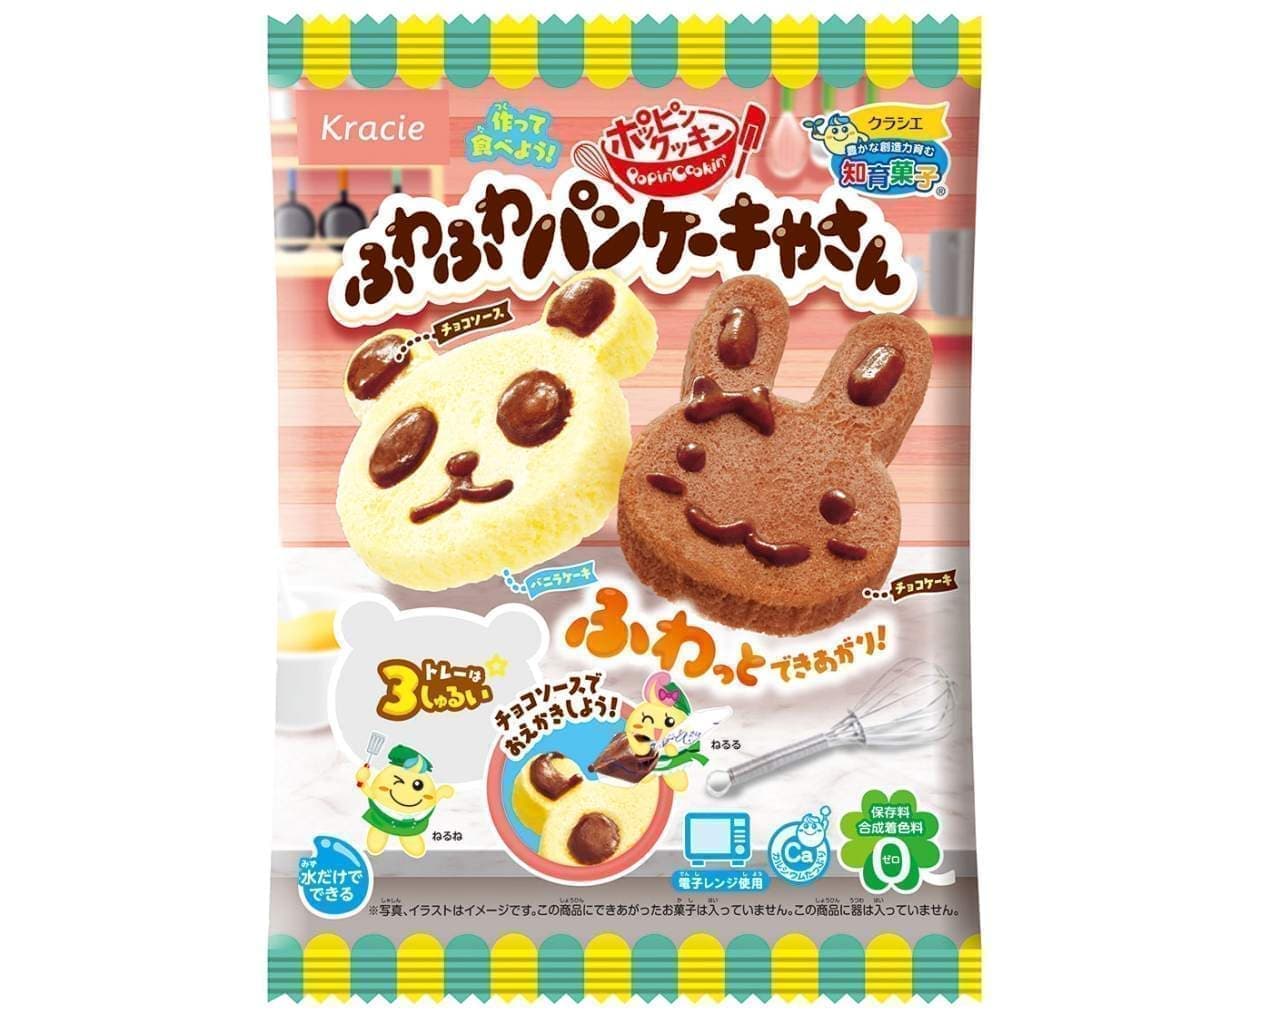 New educational confectionery "Poppin Cookin Fluffy Pancake Yasan"